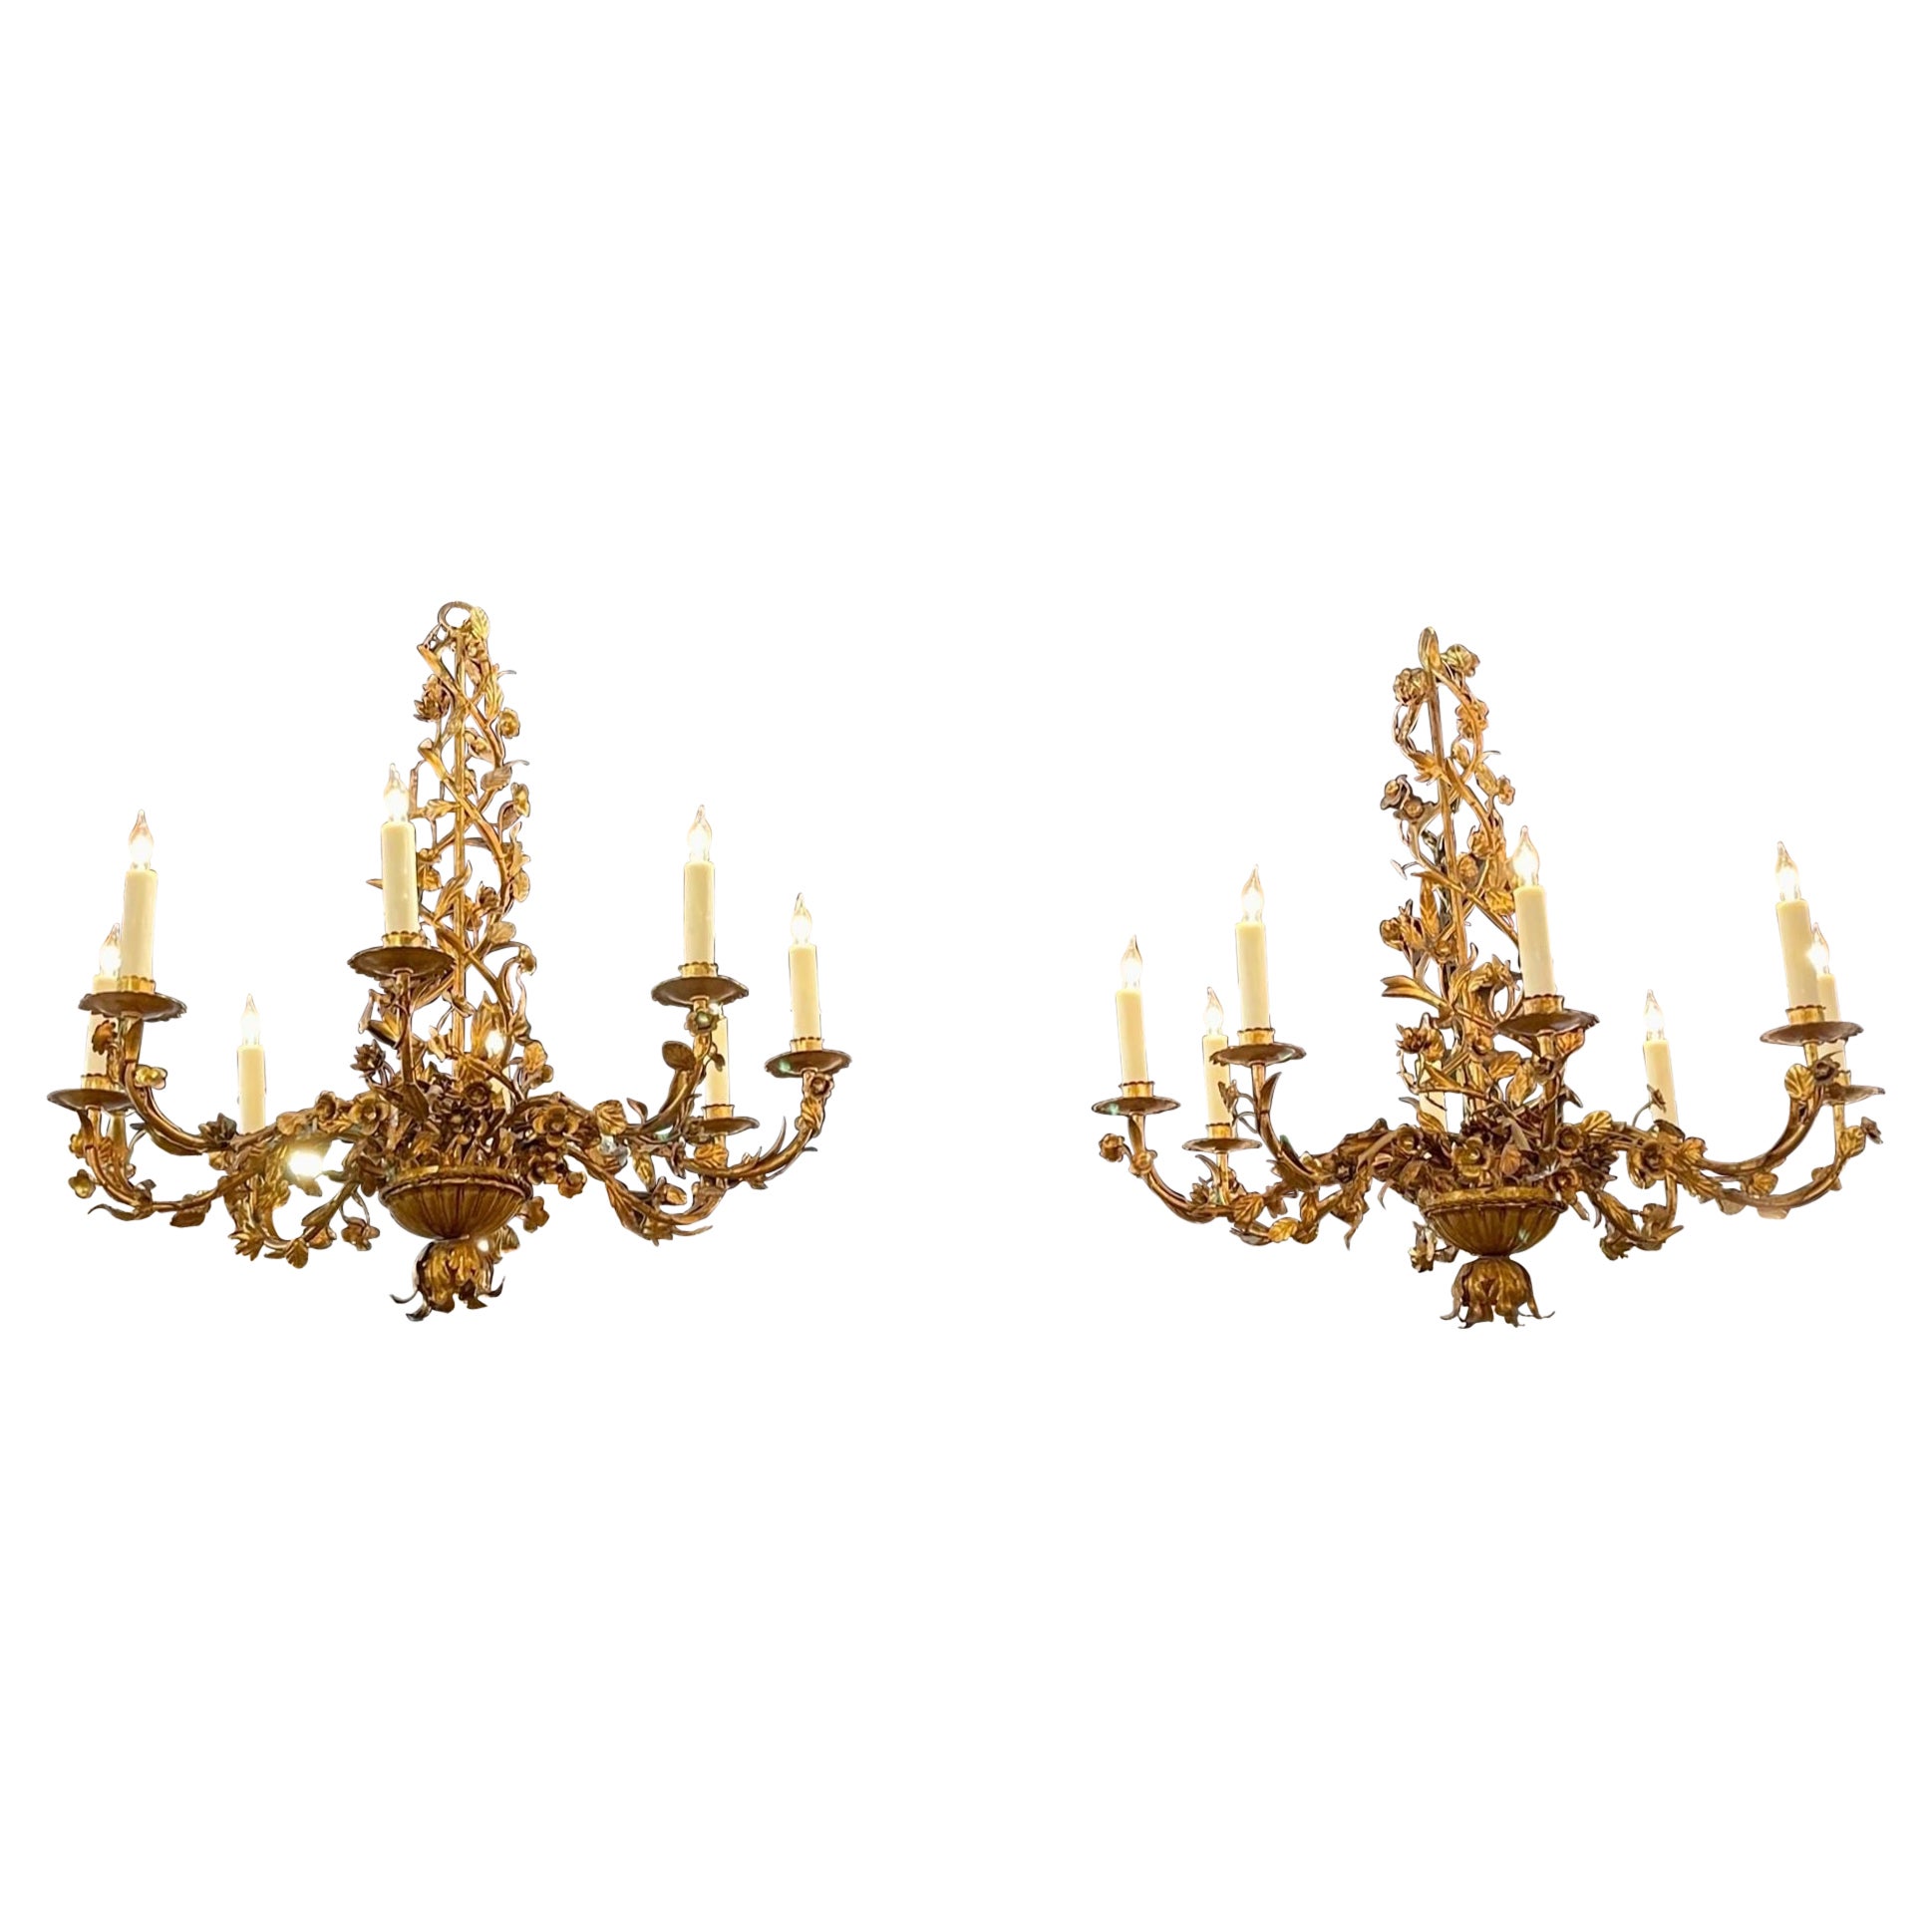 19th Century Italian Gilt Tole Floral Chandeliers with 8 Lights